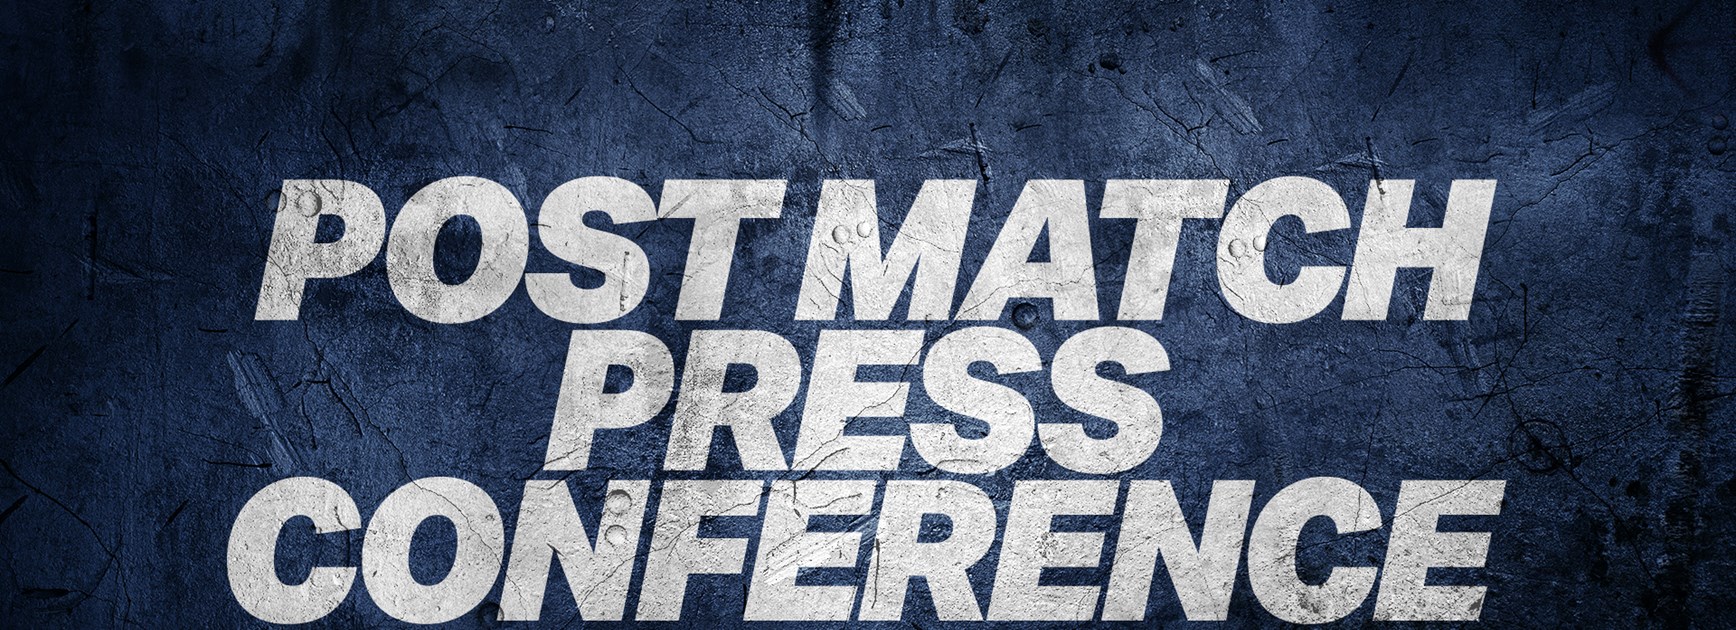 Watch: All six Saturday press conferences